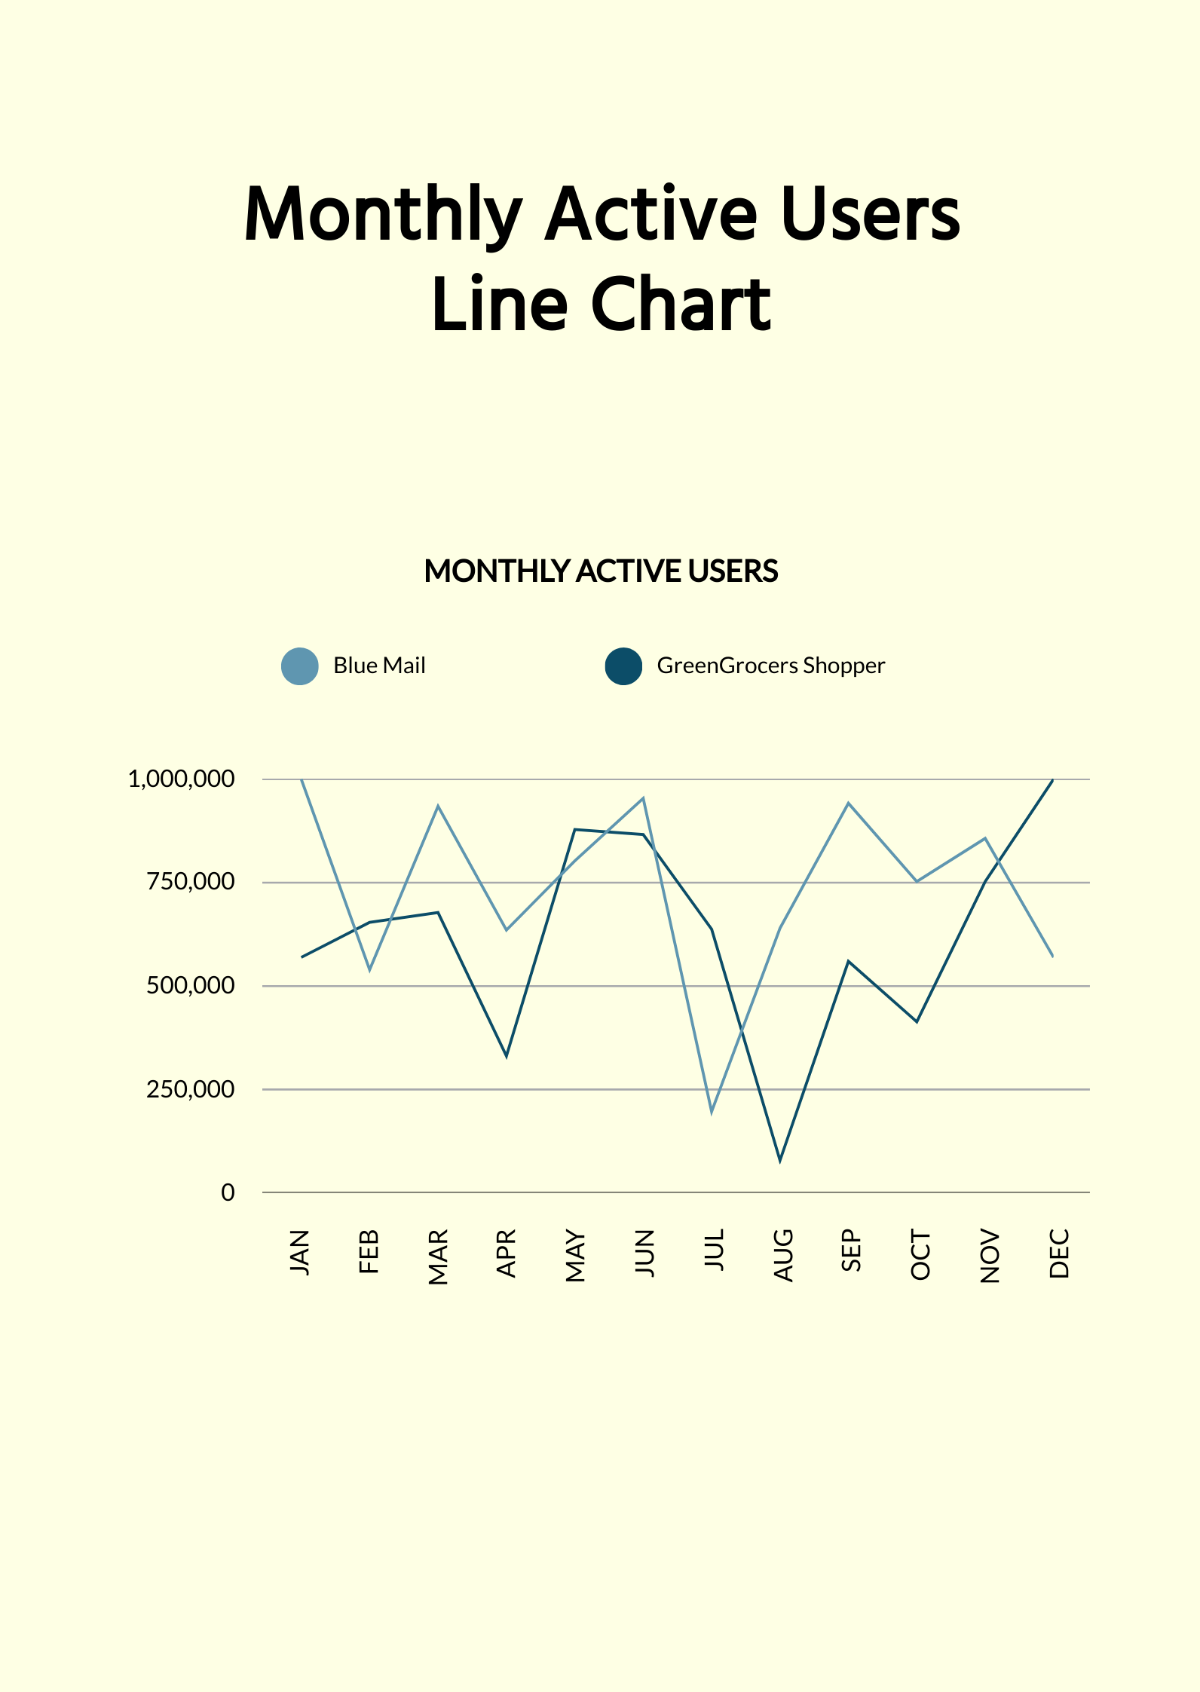 Monthly Active Users Line Chart